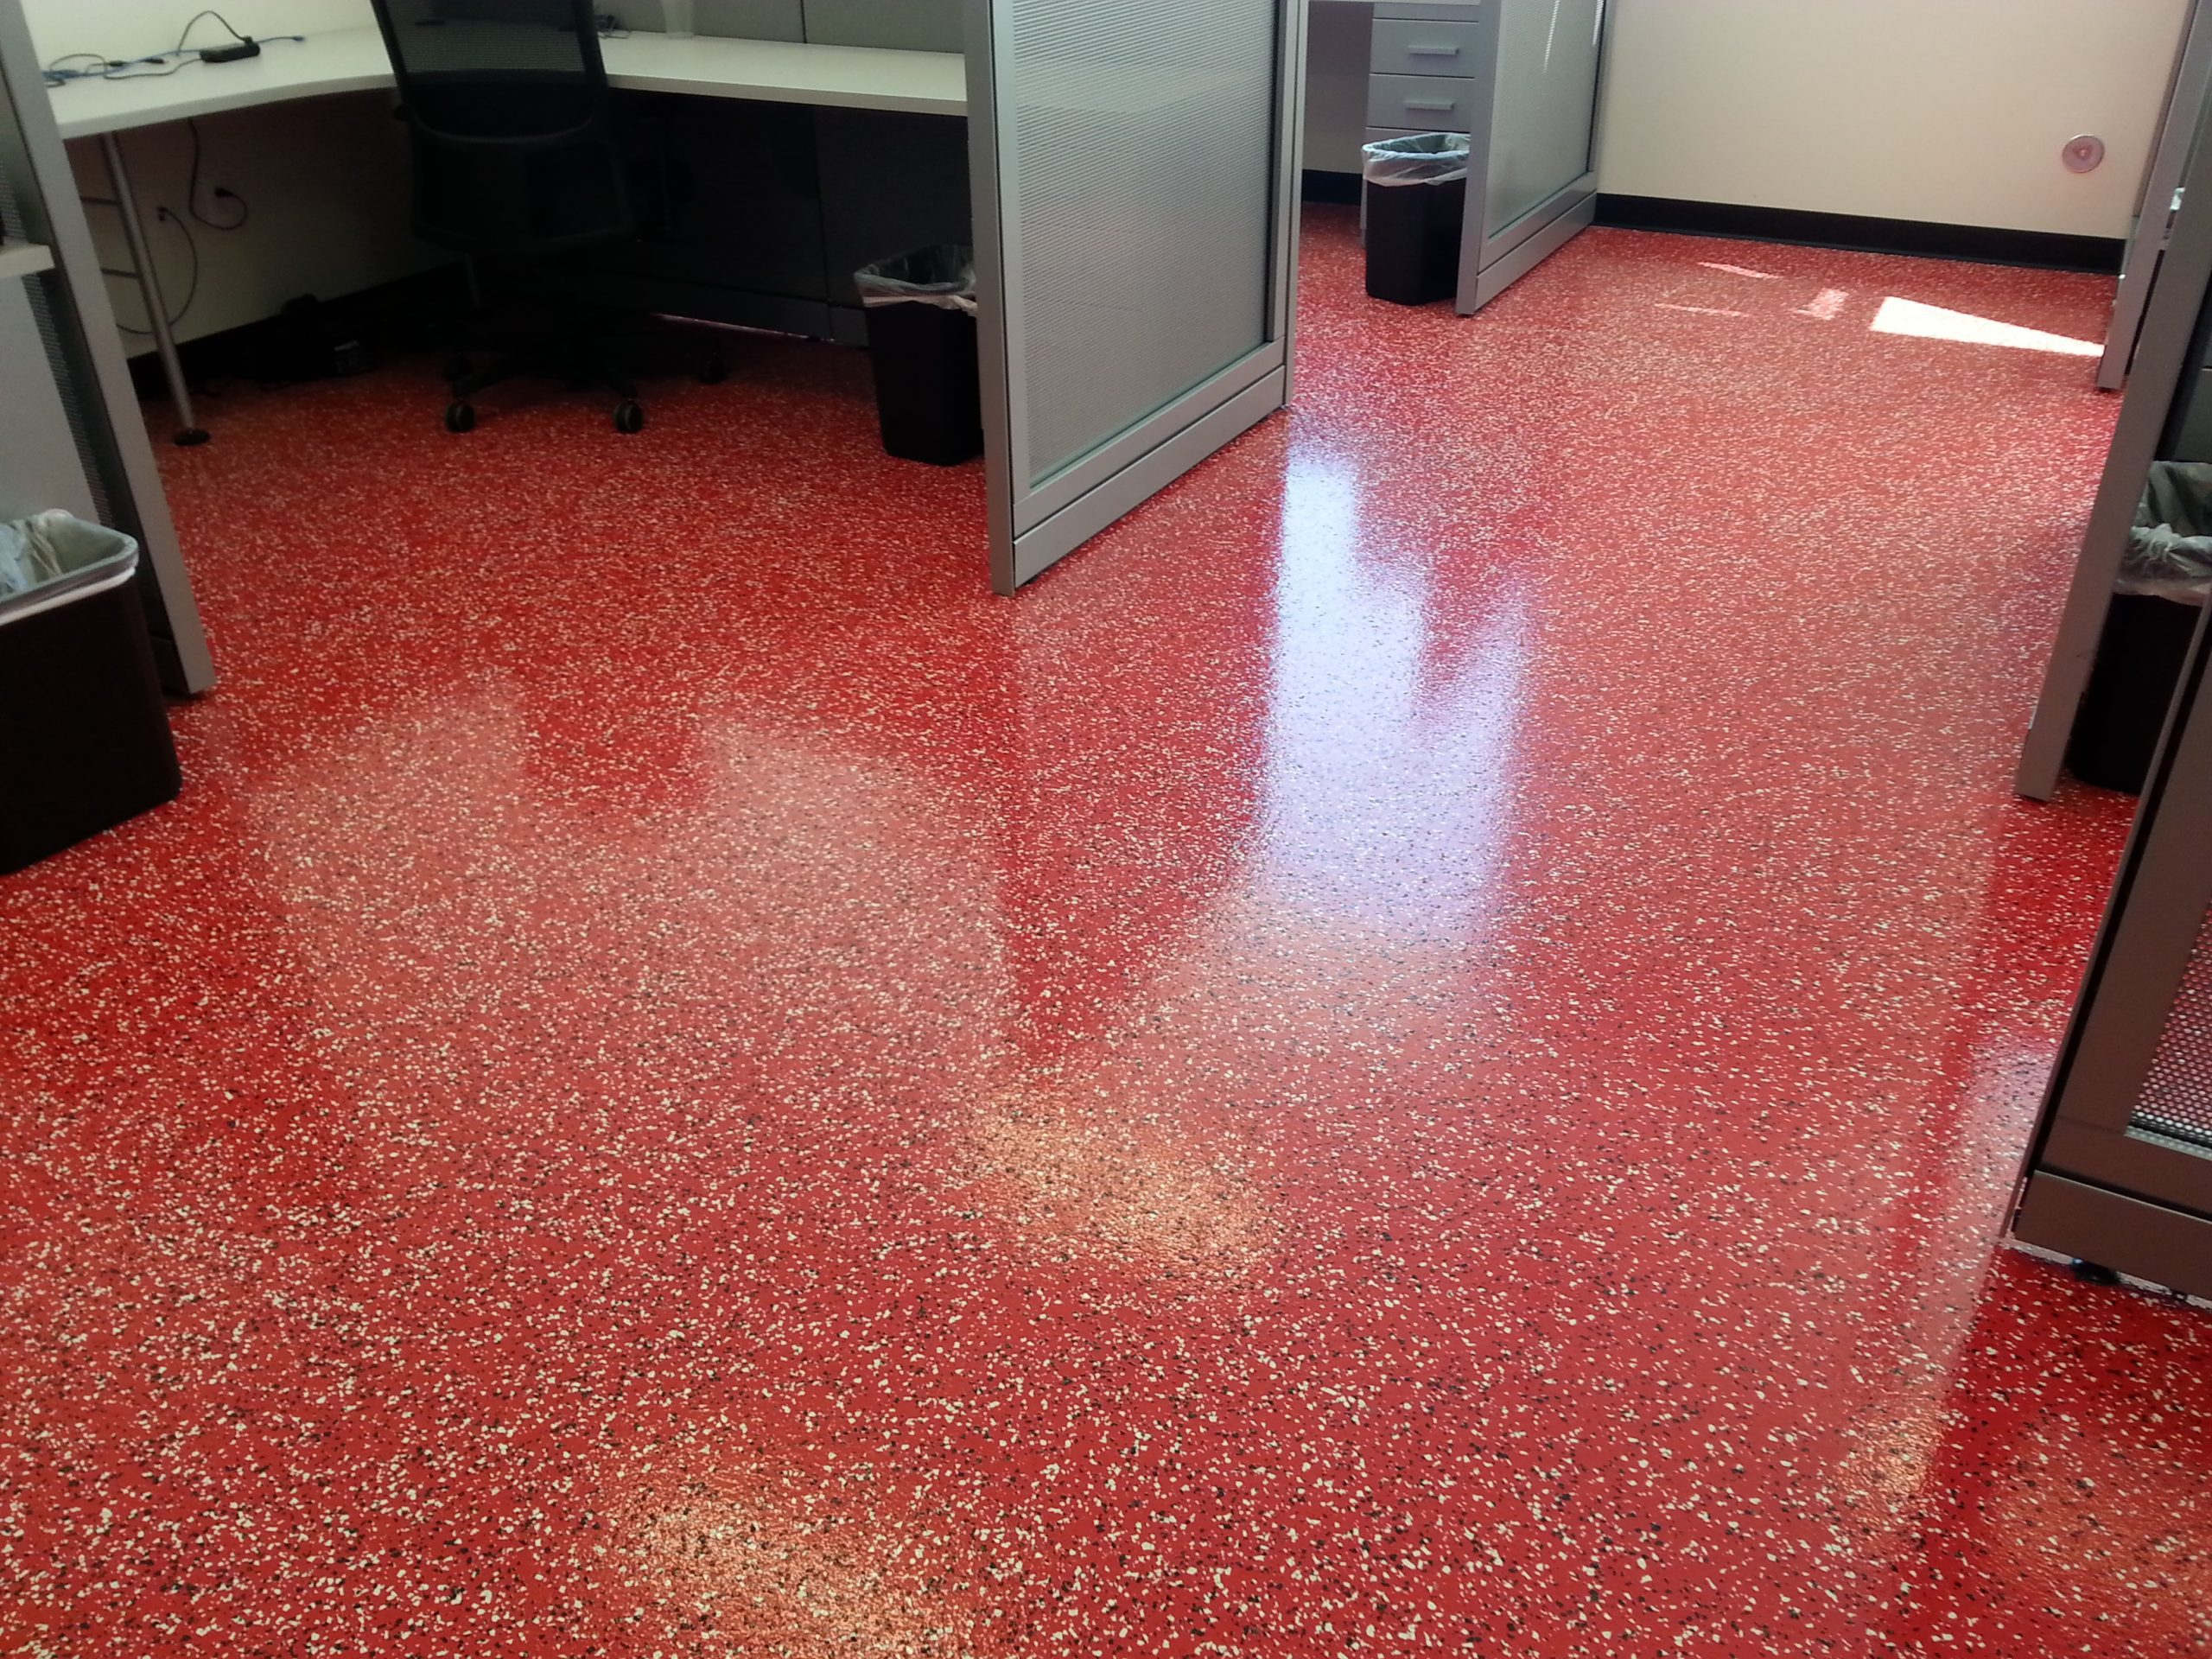 20131023 124520 scaled - FLOOR IN - Industrial Epoxy Company